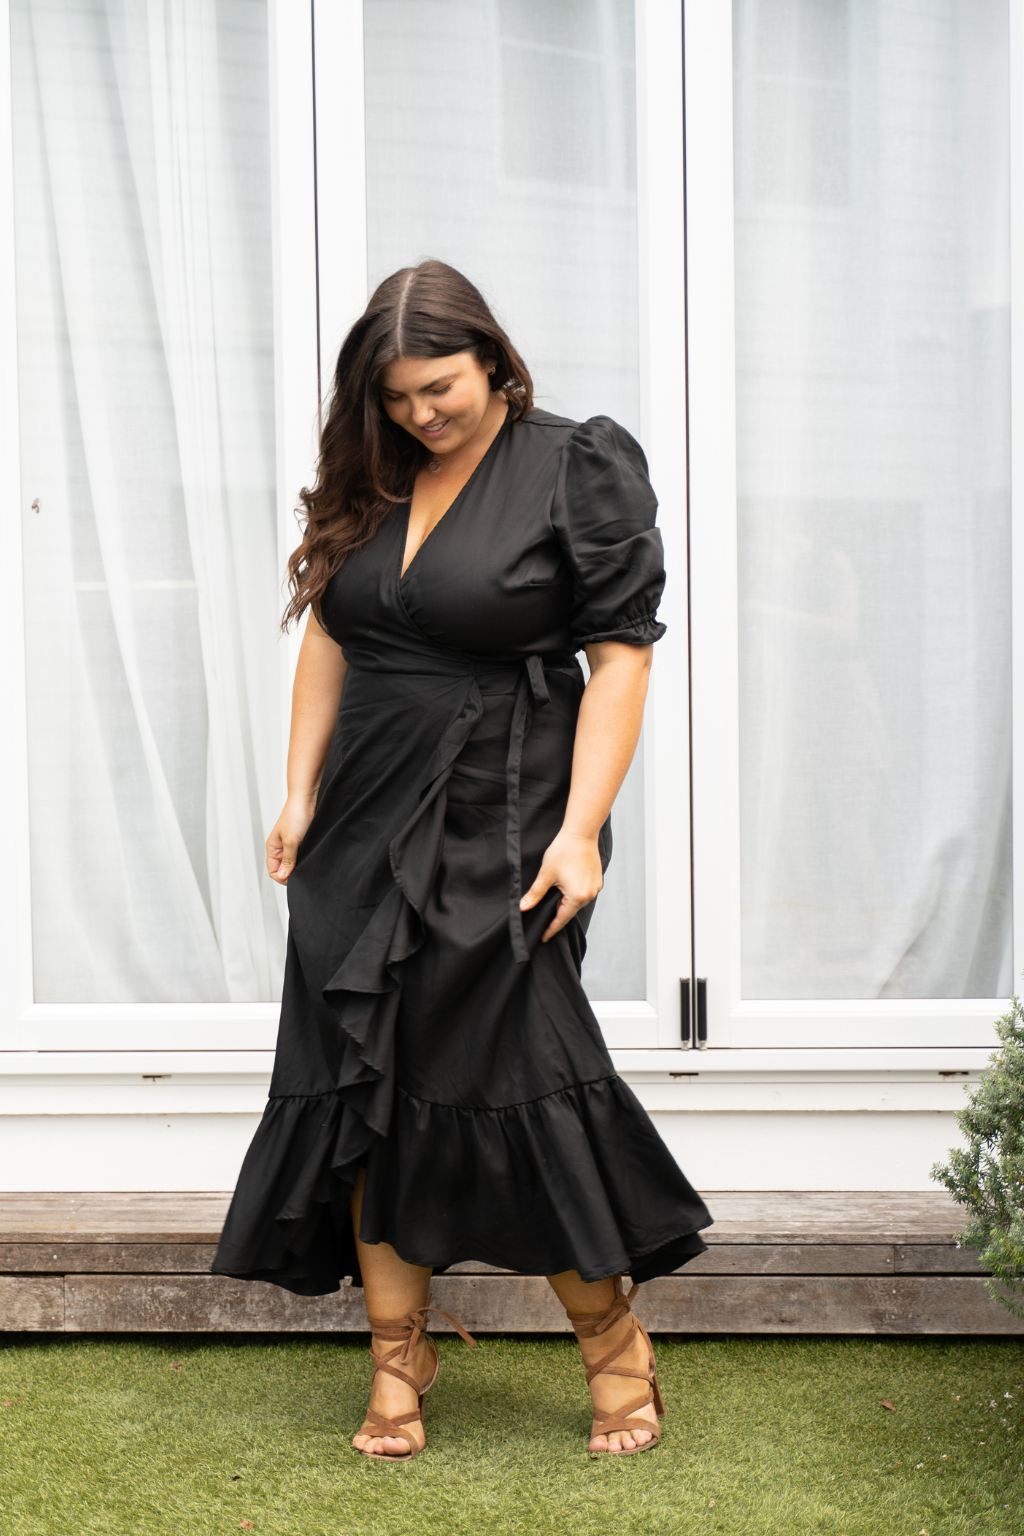 Fashion & The Problem With Sizing